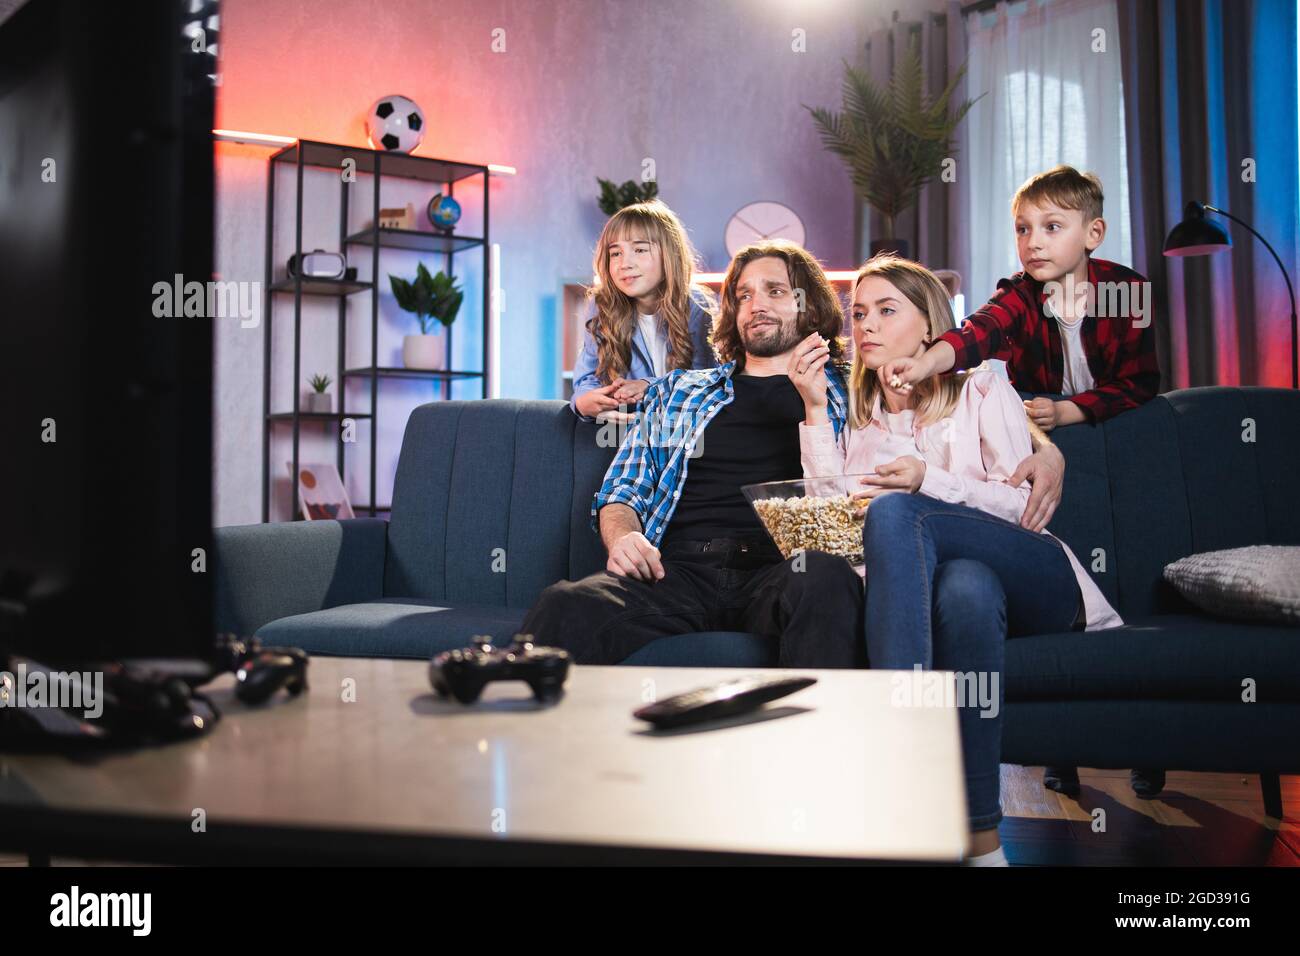 Family entertainment and unity. Relaxed happy smiling parents and their two cute kids boy and girl, watching TV-show at home in the evening and eating popcorn from glass bowl Stock Photo